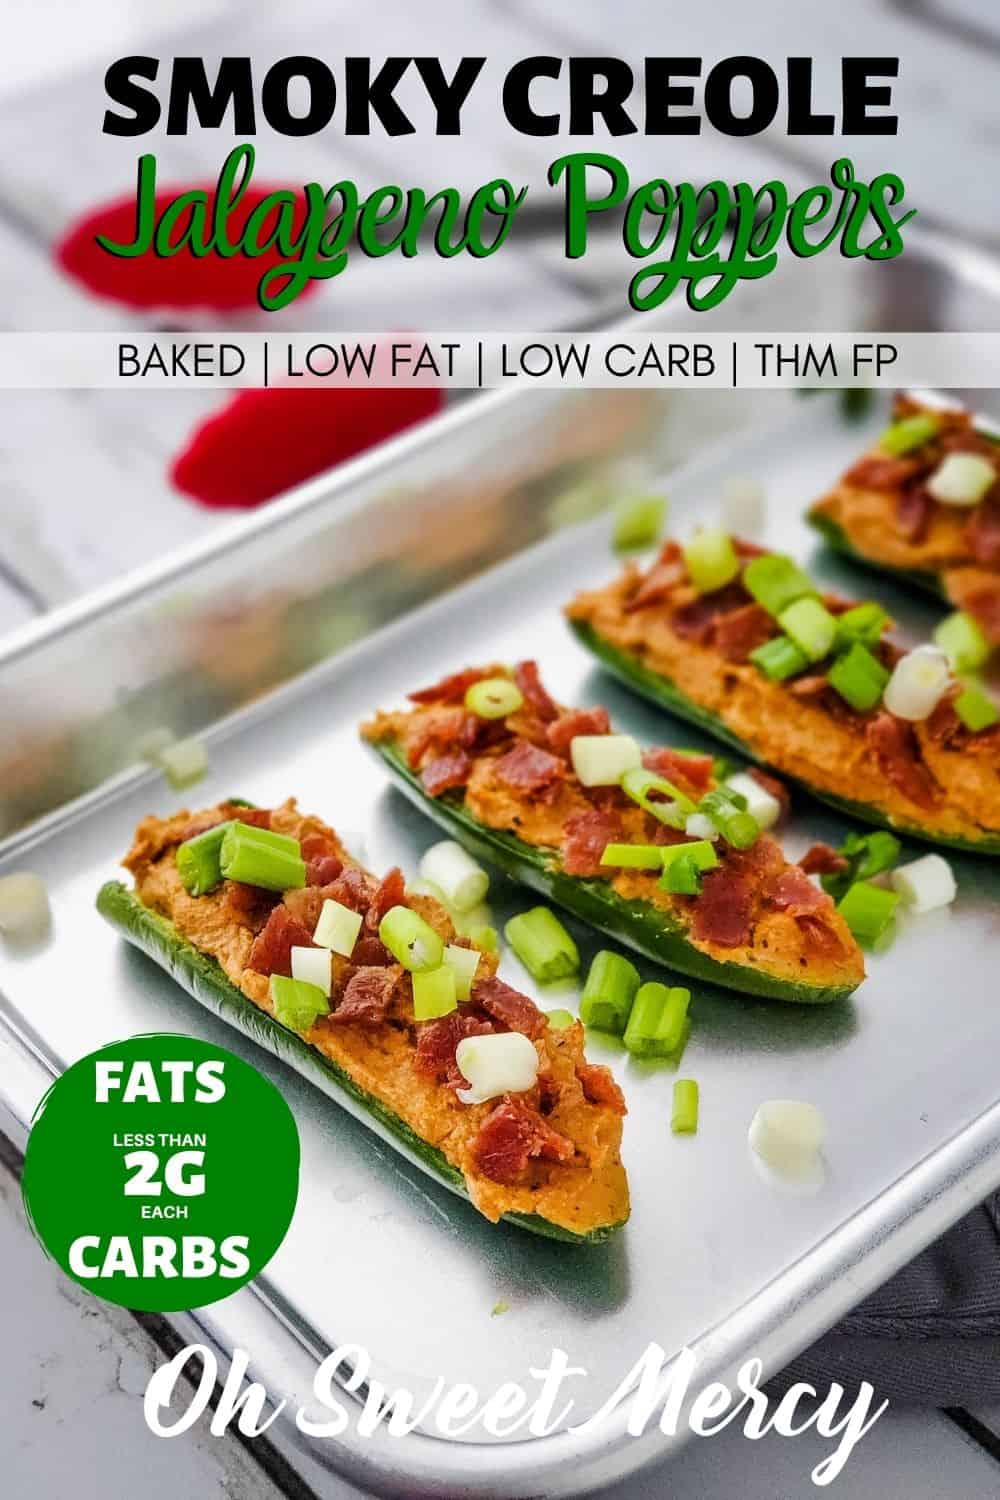 Jalapeno poppers are so fun and delicious, but often so full of fats or carbs or both! Lighten up those spicy poppers with my Smoky Creole Baked Stuffed Jalapenos instead. Less than 2g each of fat and carbs, they make a terrific THM FP snack or appetizer. Or, have a few more for a lighter S option. #lowcarb #lowfat #thmfp #fuelpull #thmsnacks #appetizers @ohsweetmercy